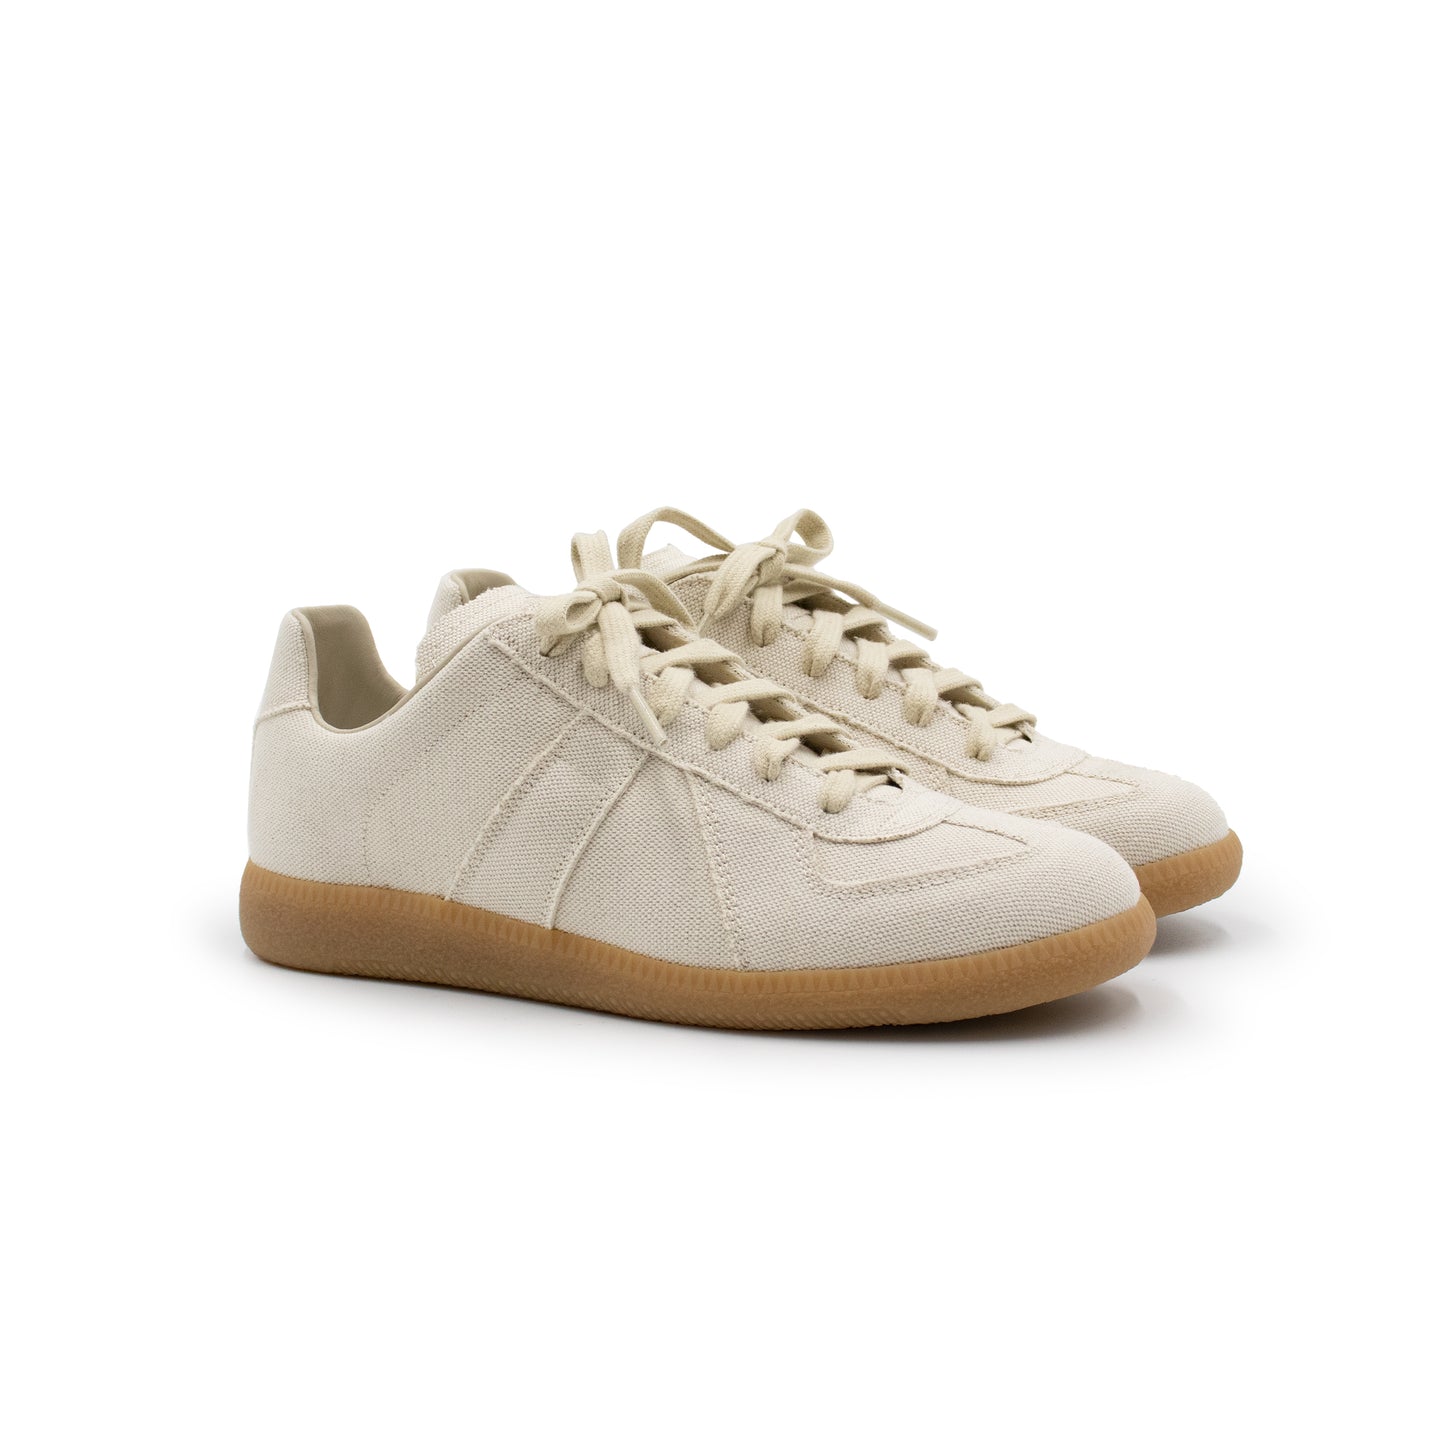 Replica Cut Out Sneakers in White Sand